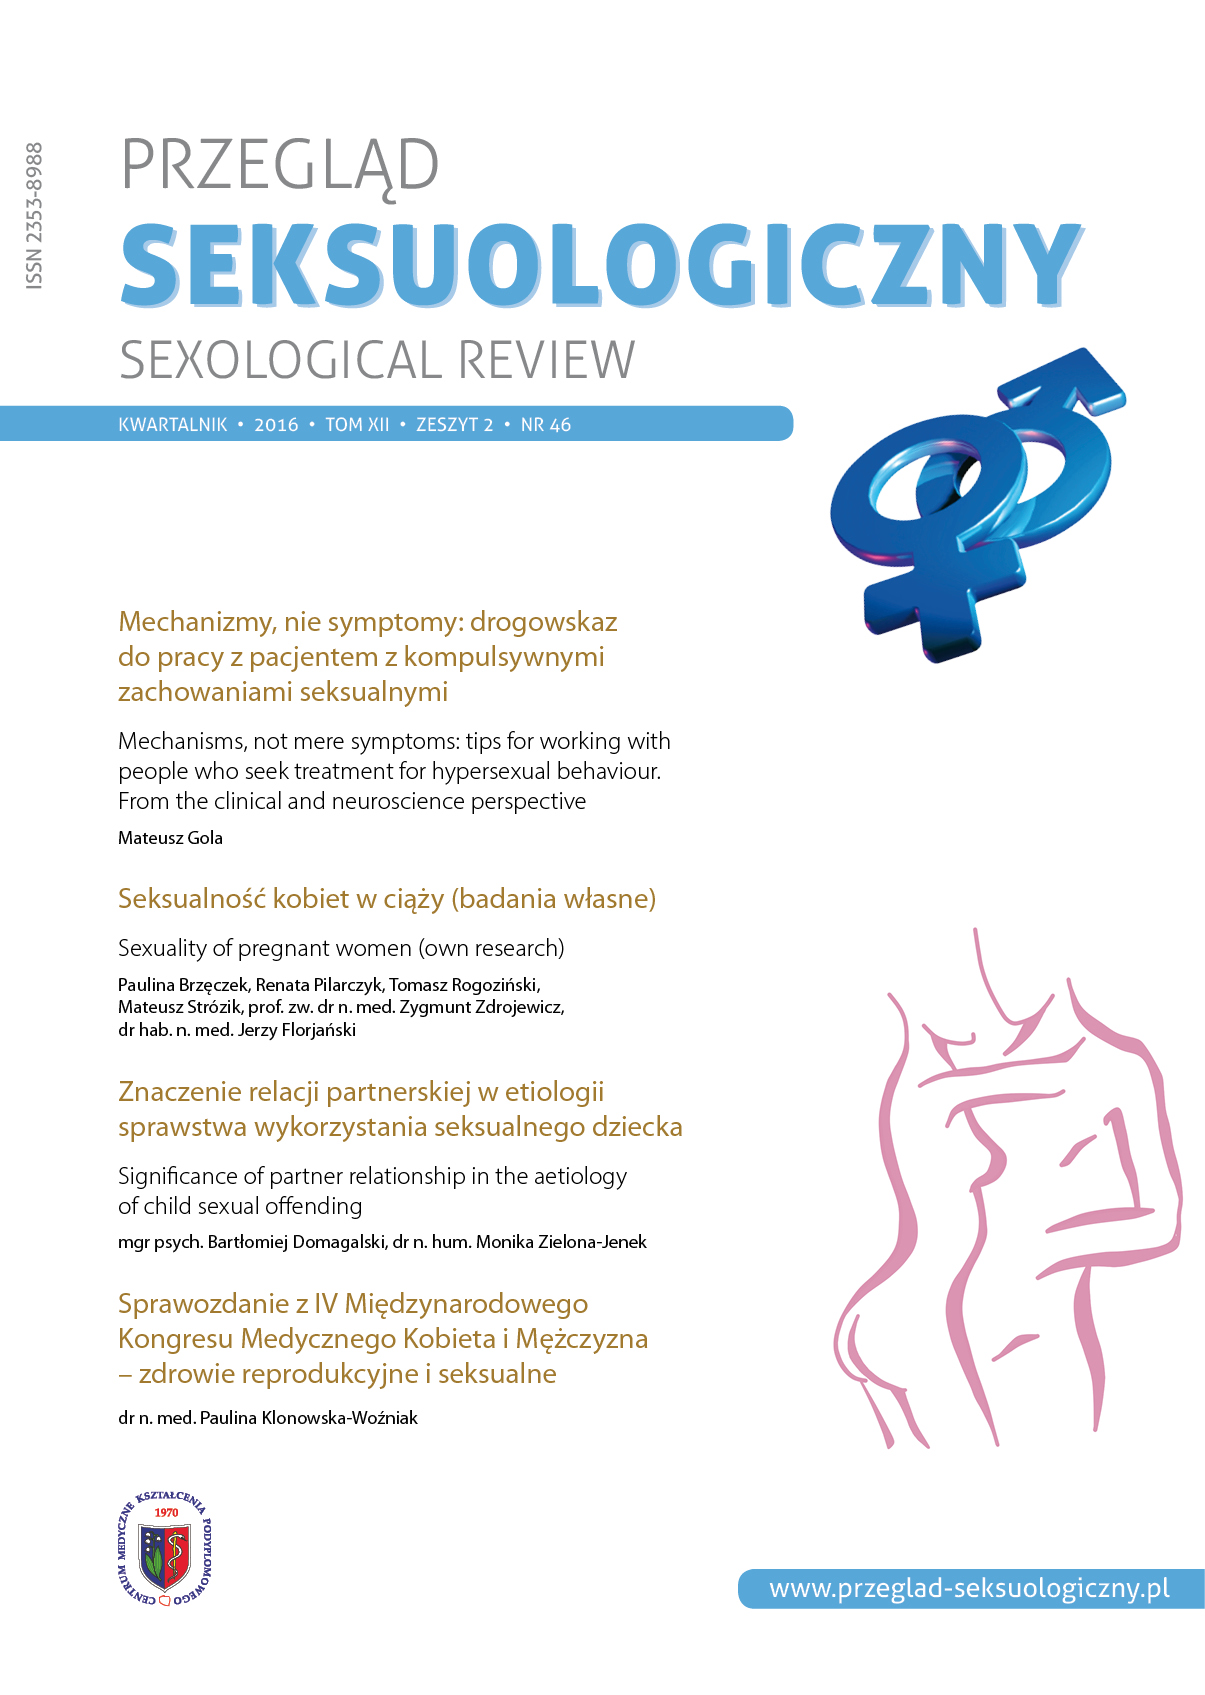 Sexuality of pregnant women (own research) Cover Image